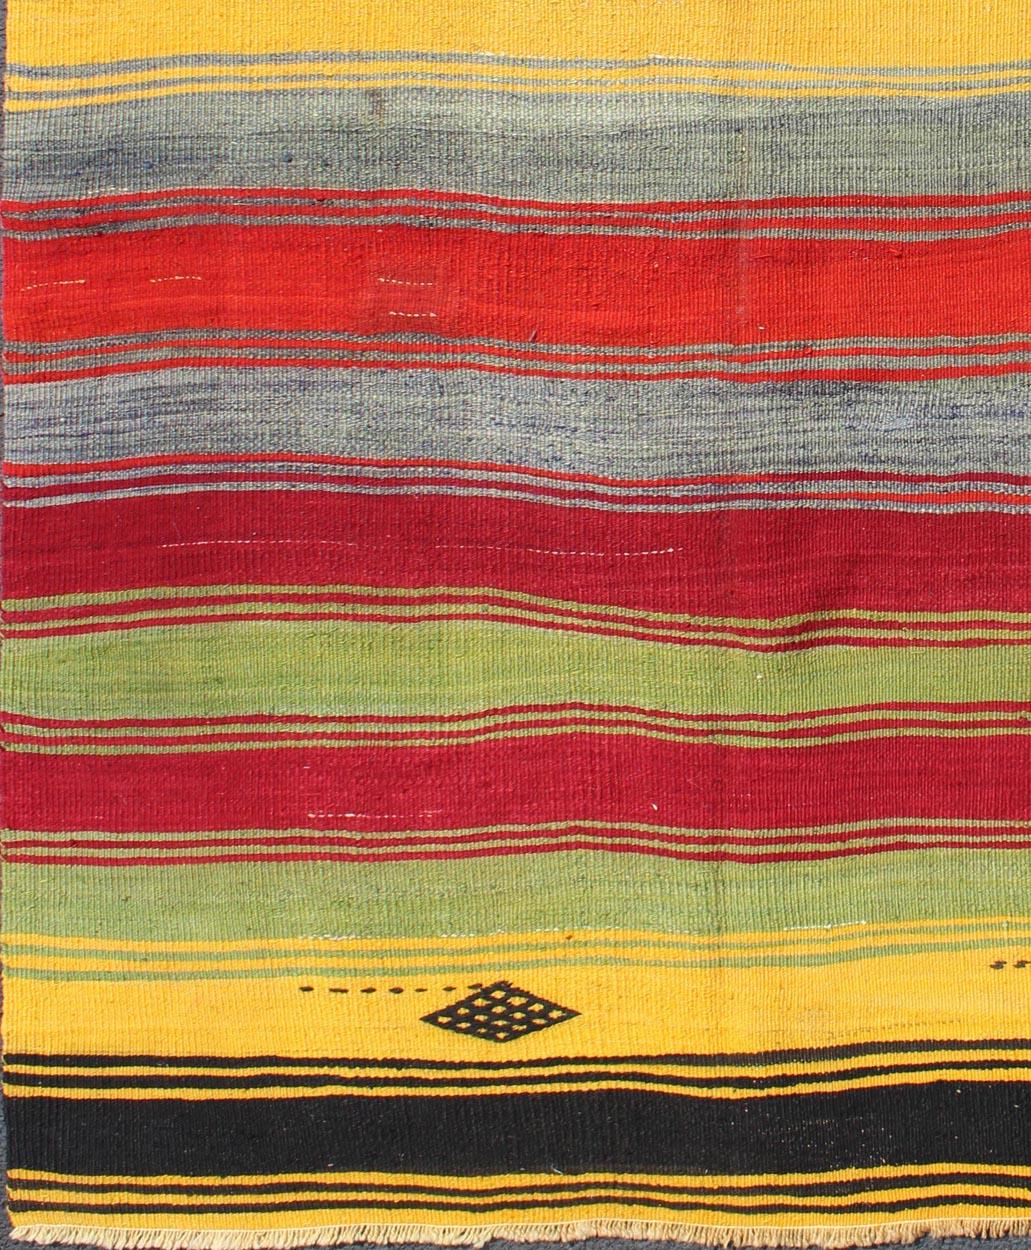 Colorful vintage Turkish Kilim rug with subtle tribal shapes and stripes design, rug mtu-95042, country of origin / type: Turkey / Kilim, circa mid-20th century

Featuring a repeating horizontal stripe design, with a few tribal motifs throughout,